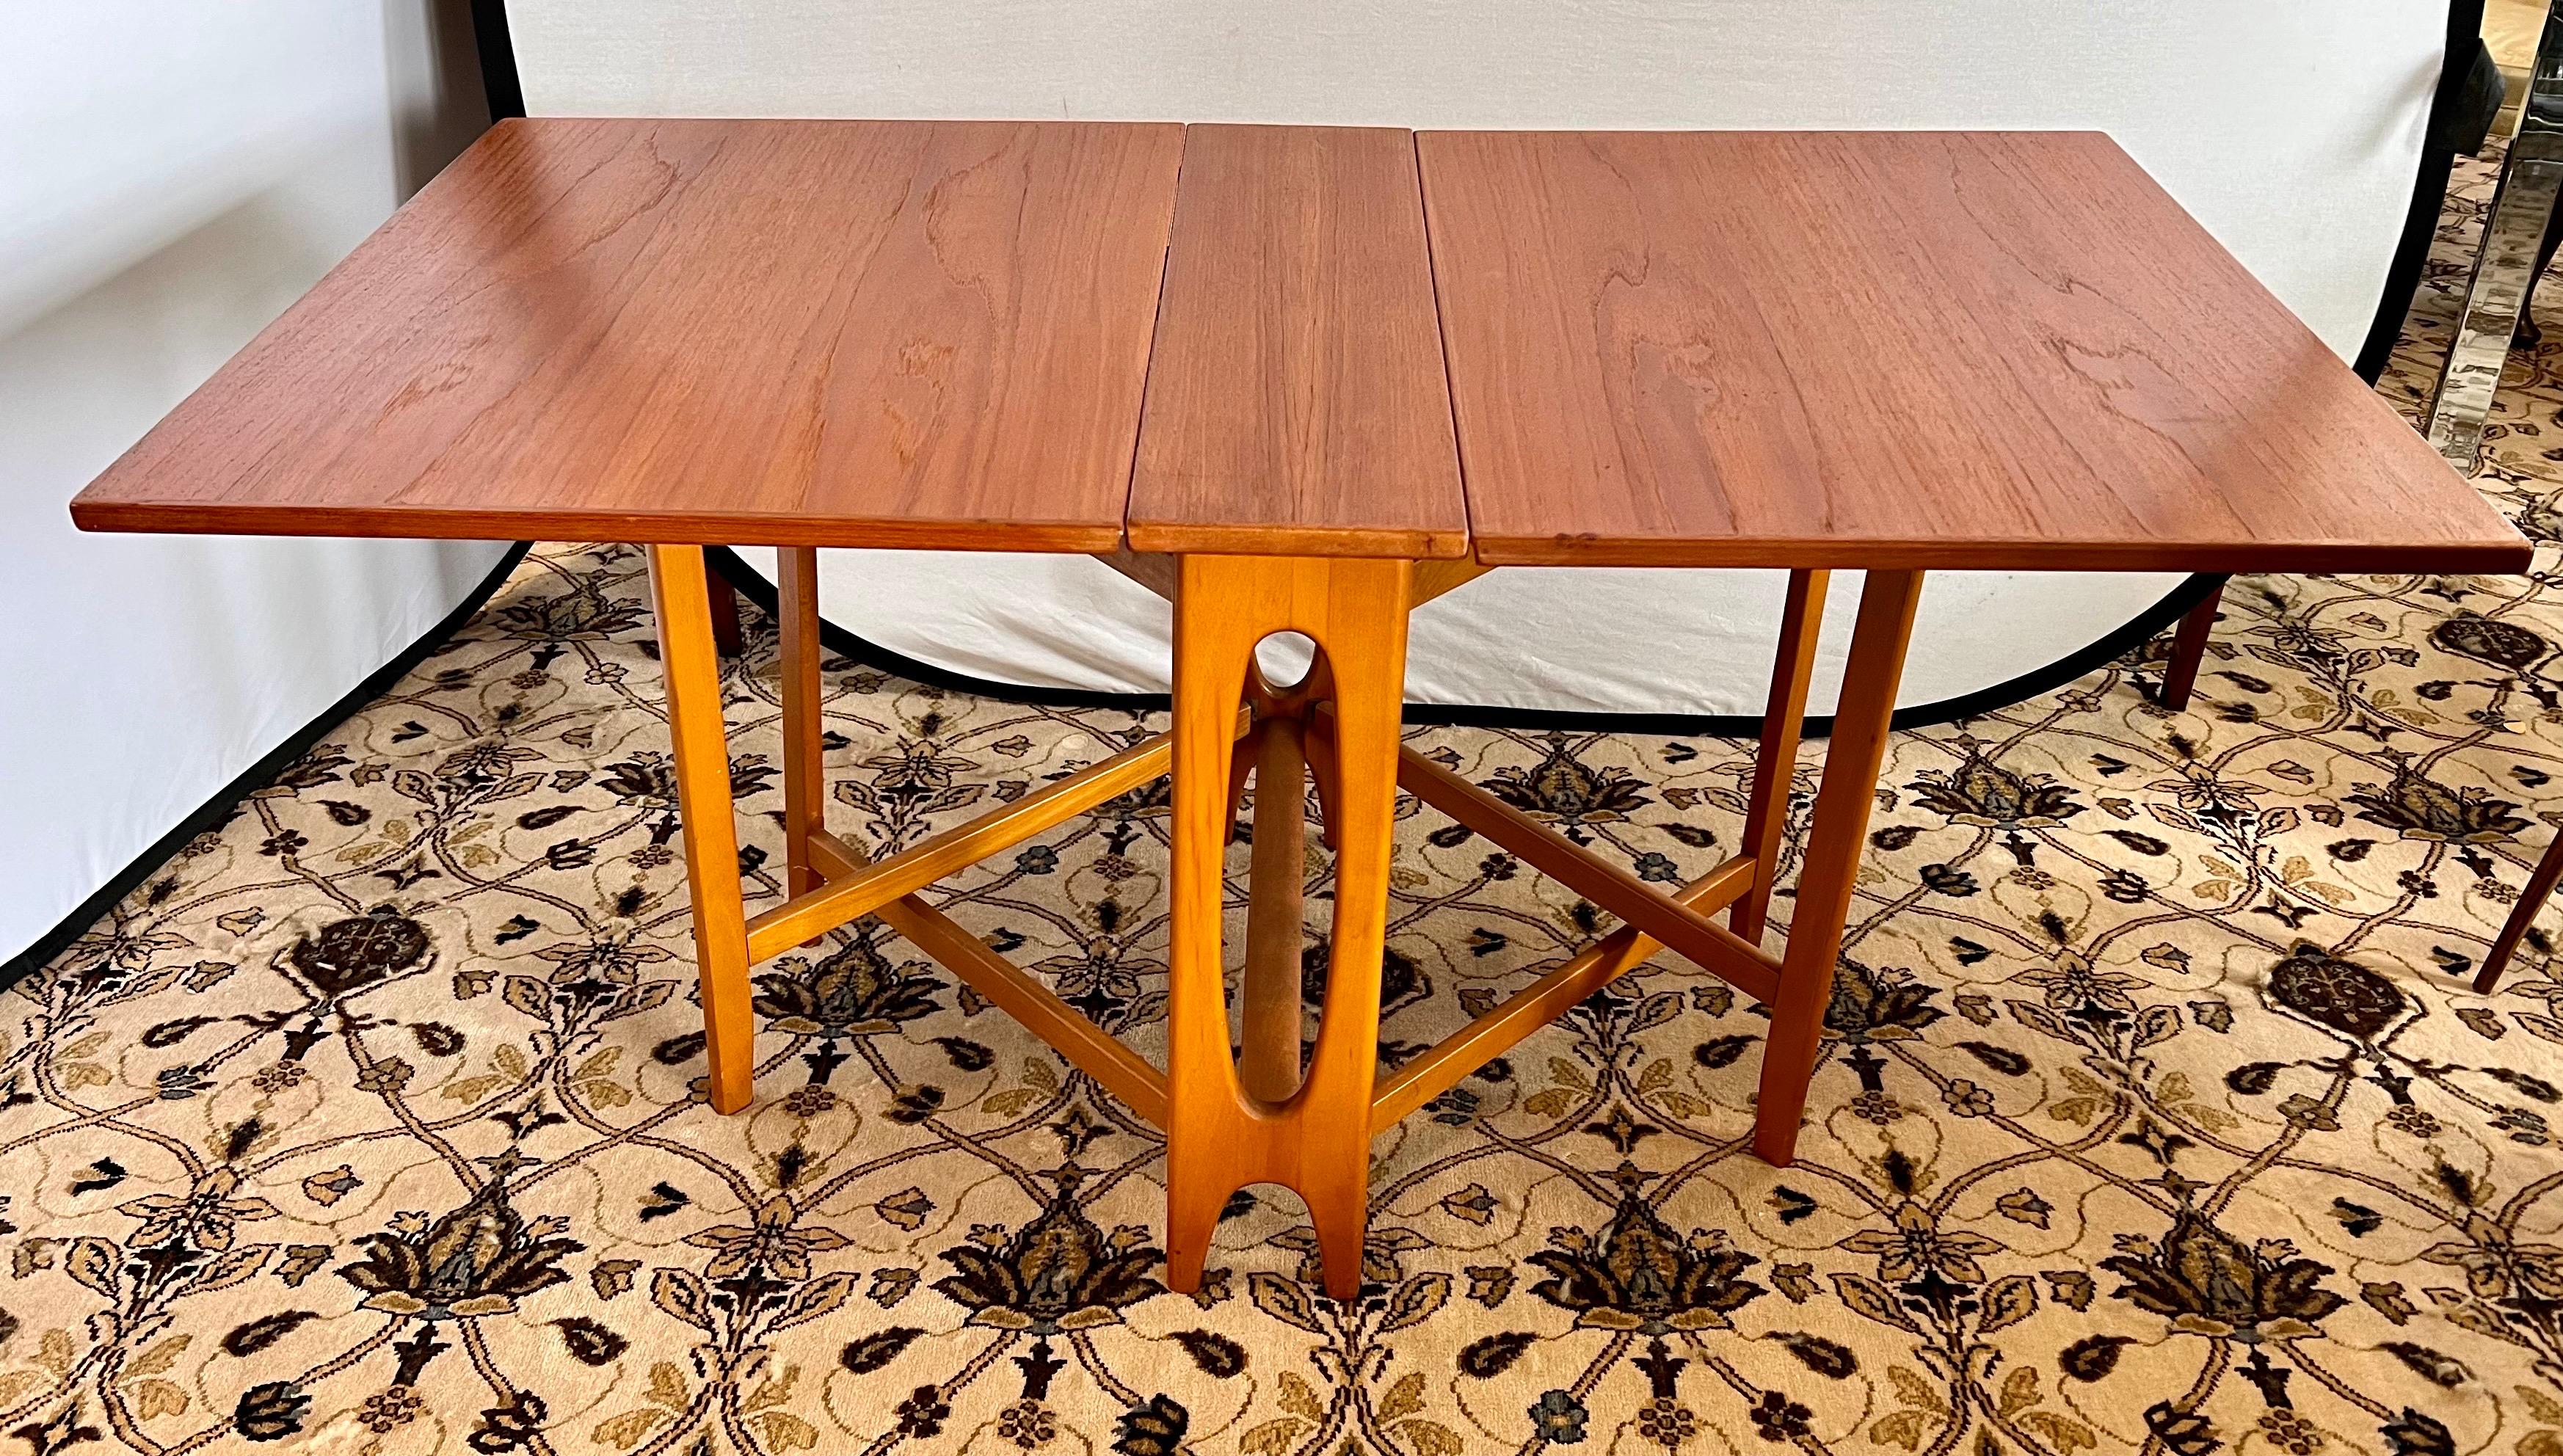 Rare Danish modern dual gate-leg teak table that is surrounded by natural walnut Norman Cherner side chairs, a set of six. Danish Modern (table) meets Mid Century Modern (chairs) and the marriage looks like a compelling one!  Why not own the best?